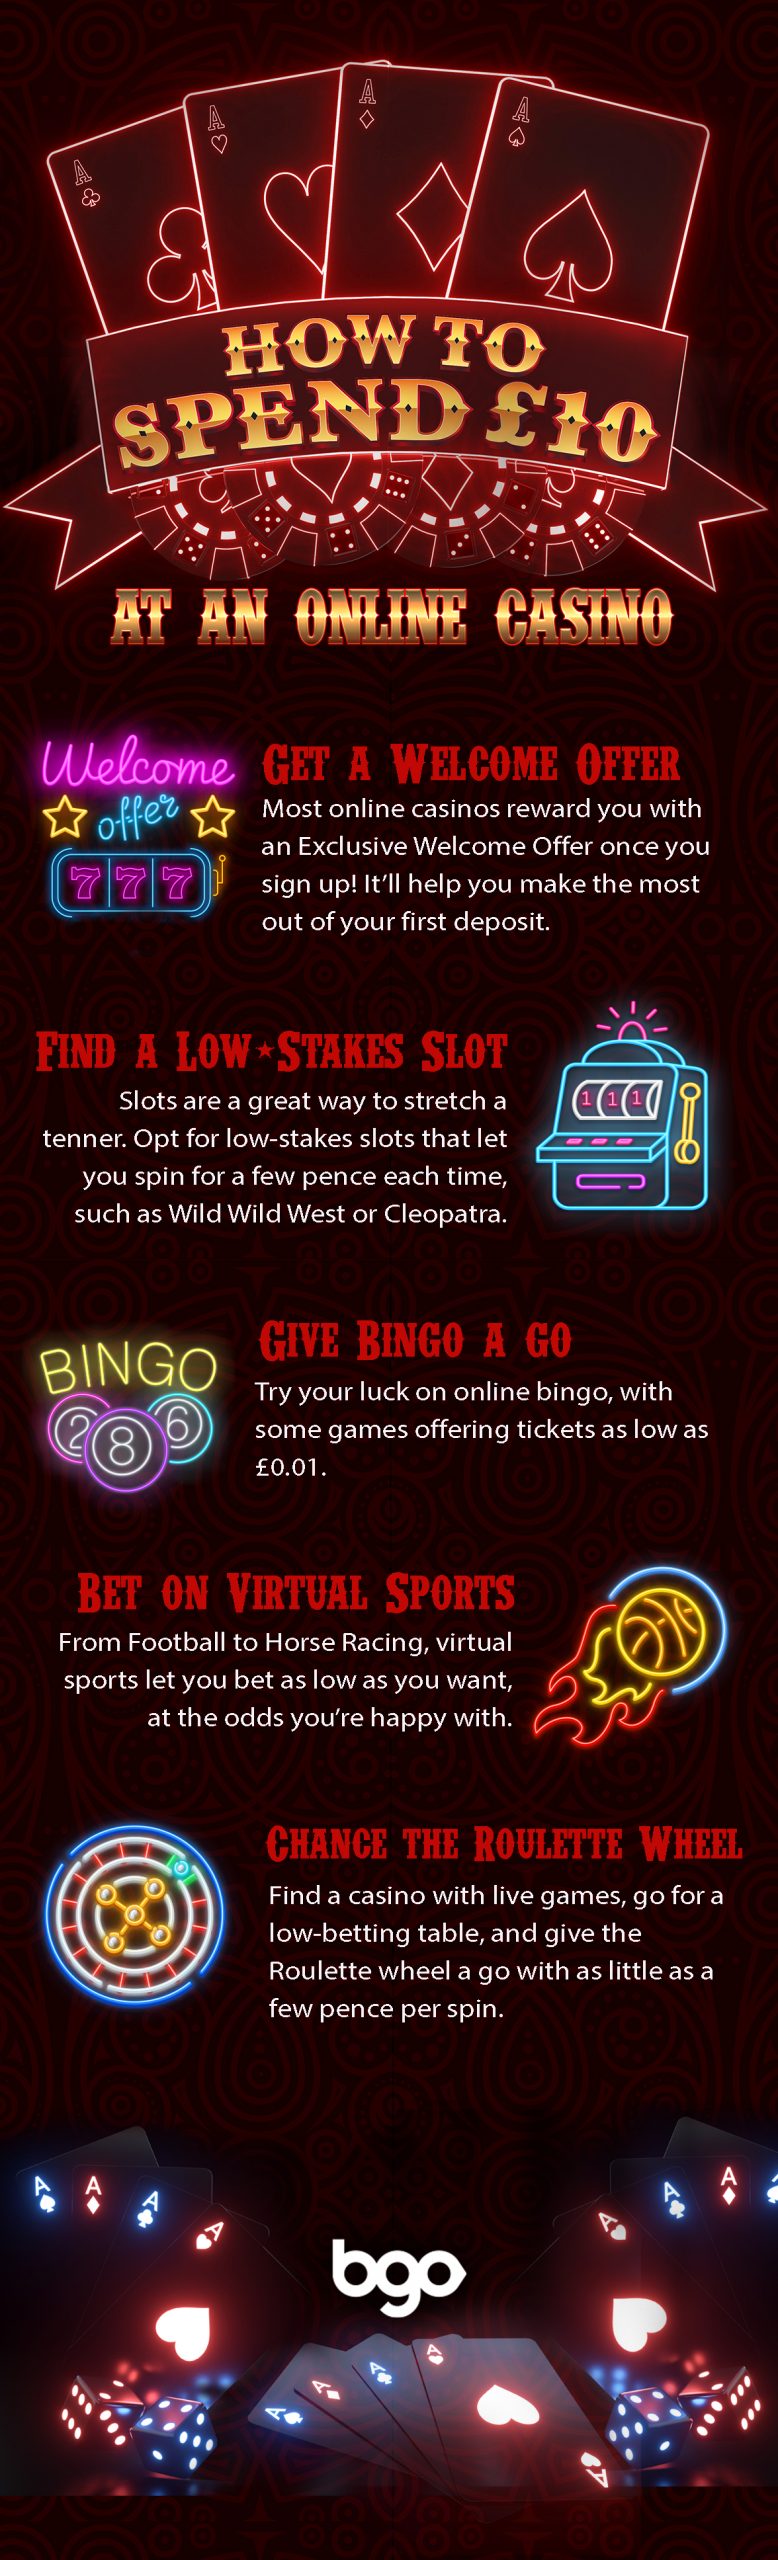 How to Spend 10 at an online casino infographic 1 scaled